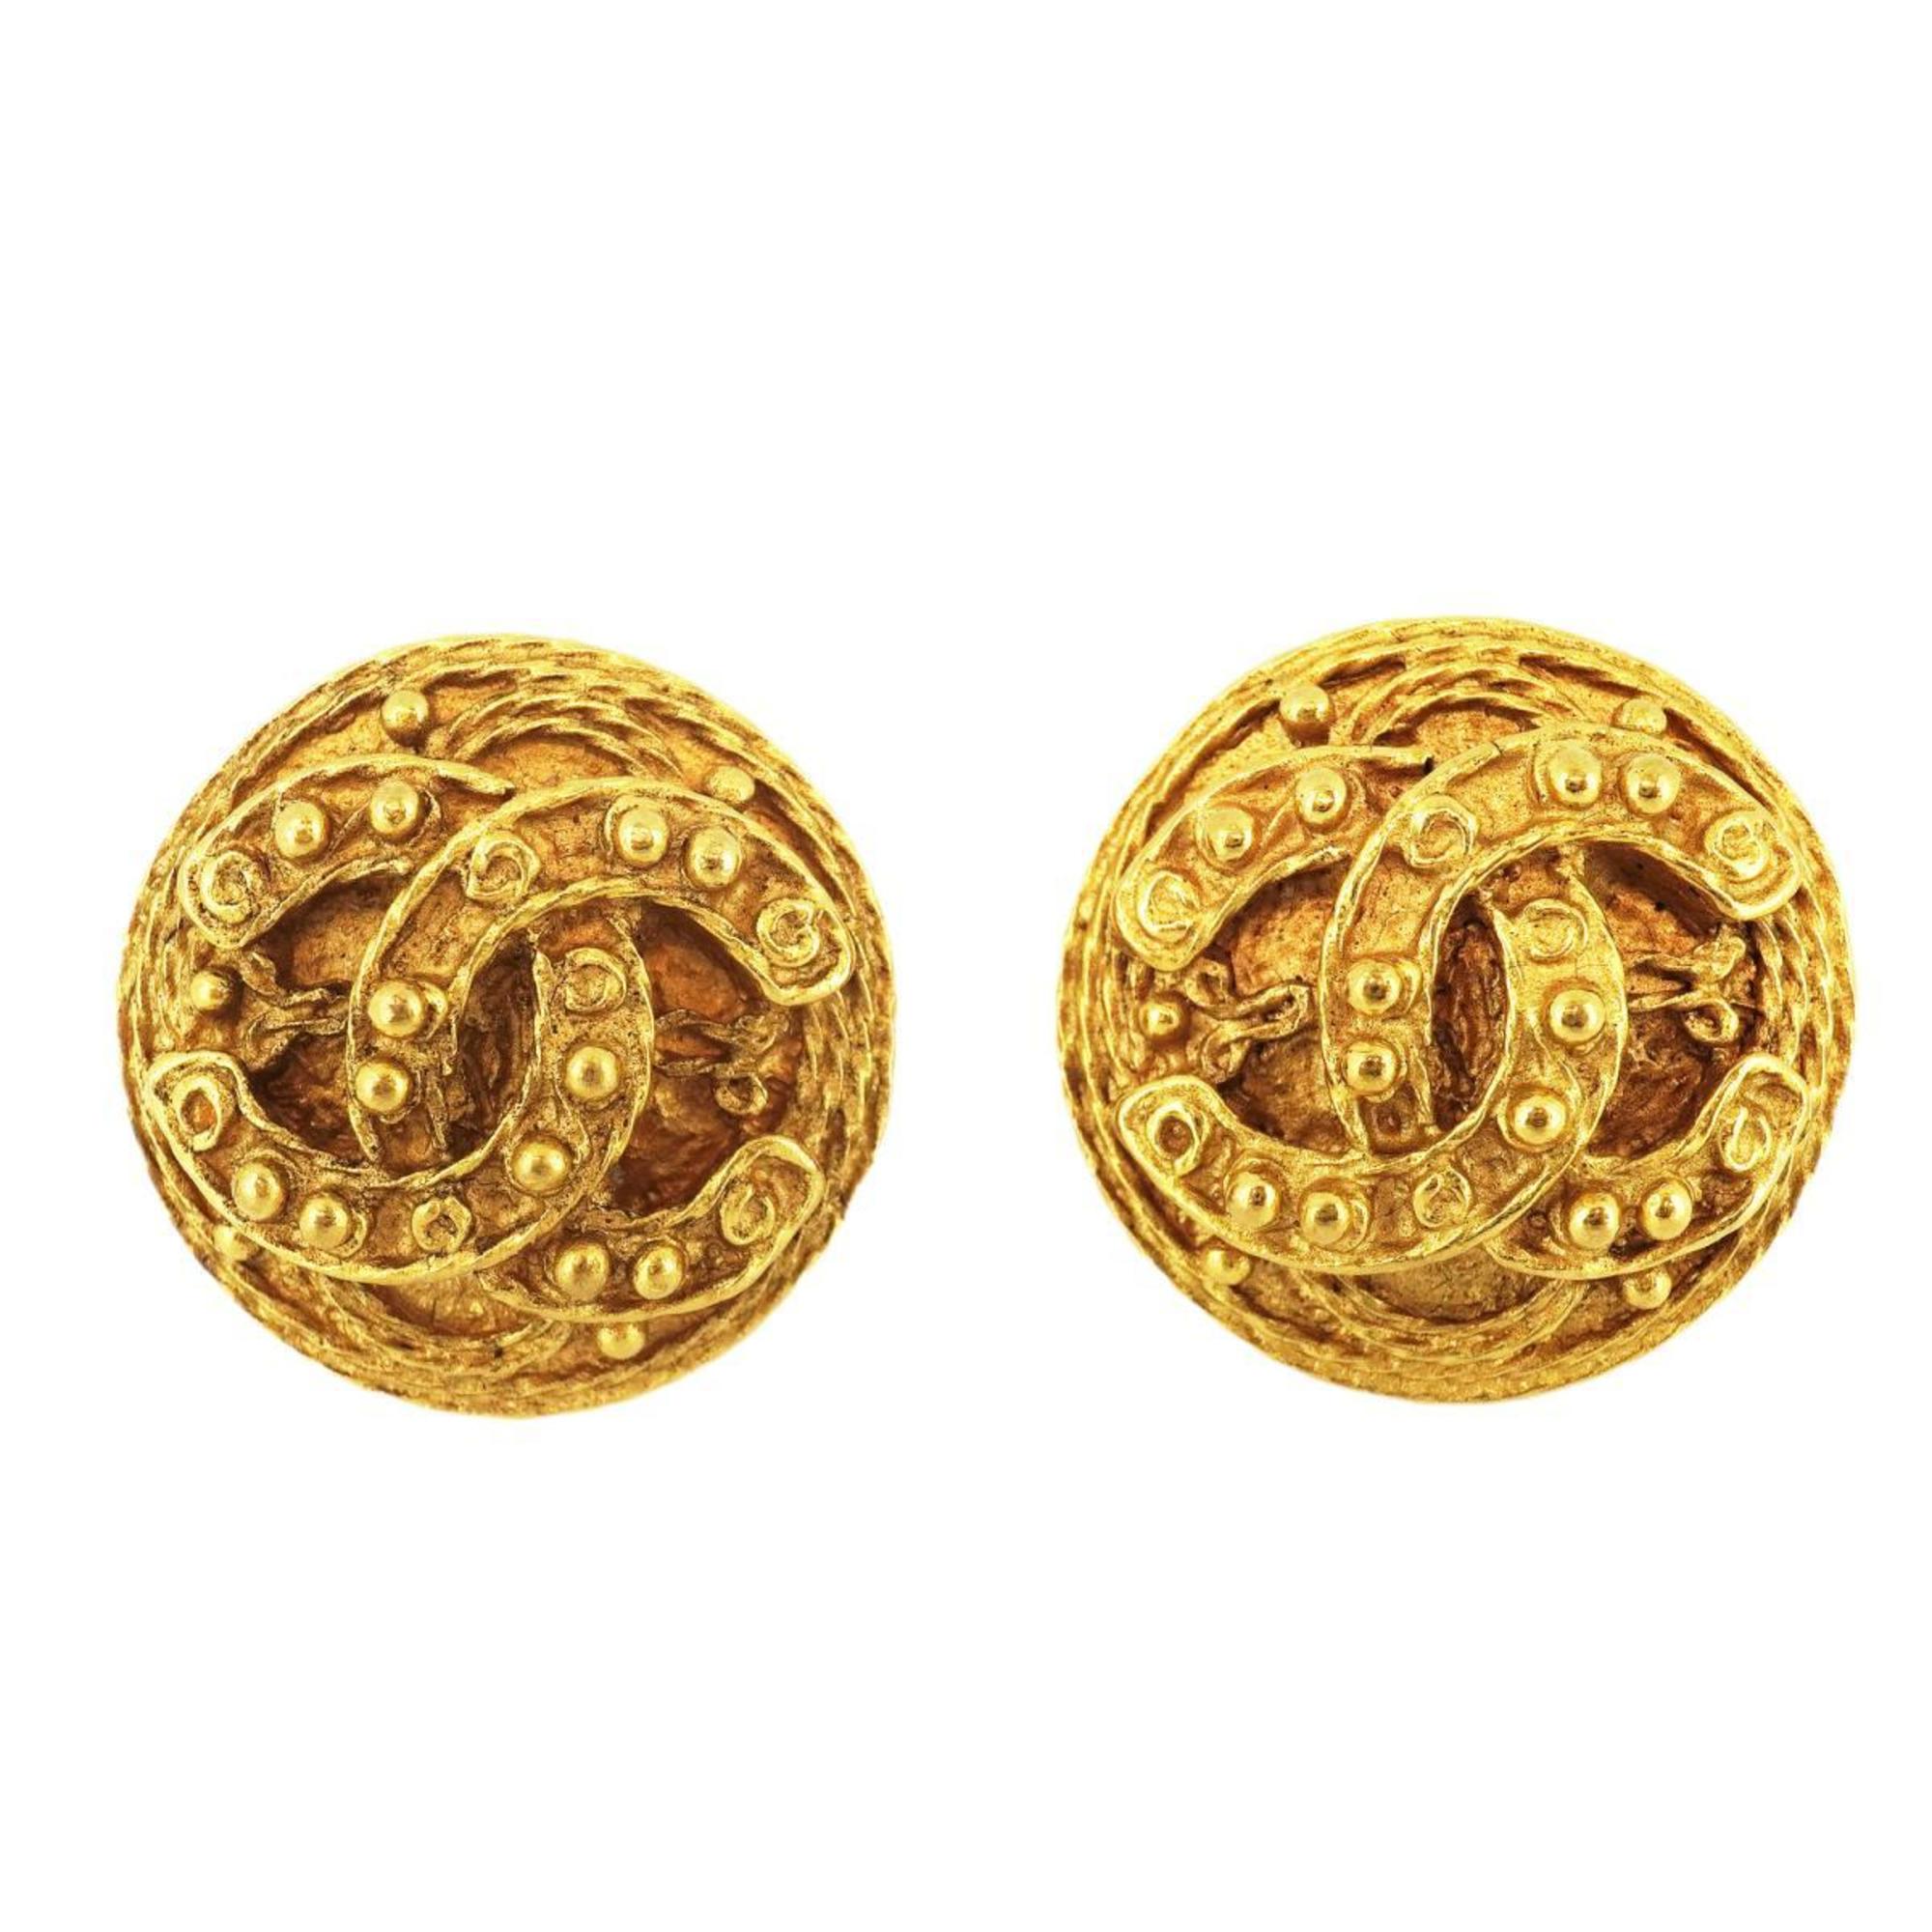 Chanel Earrings Coco Mark Circle GP Plated Gold 94A Women's